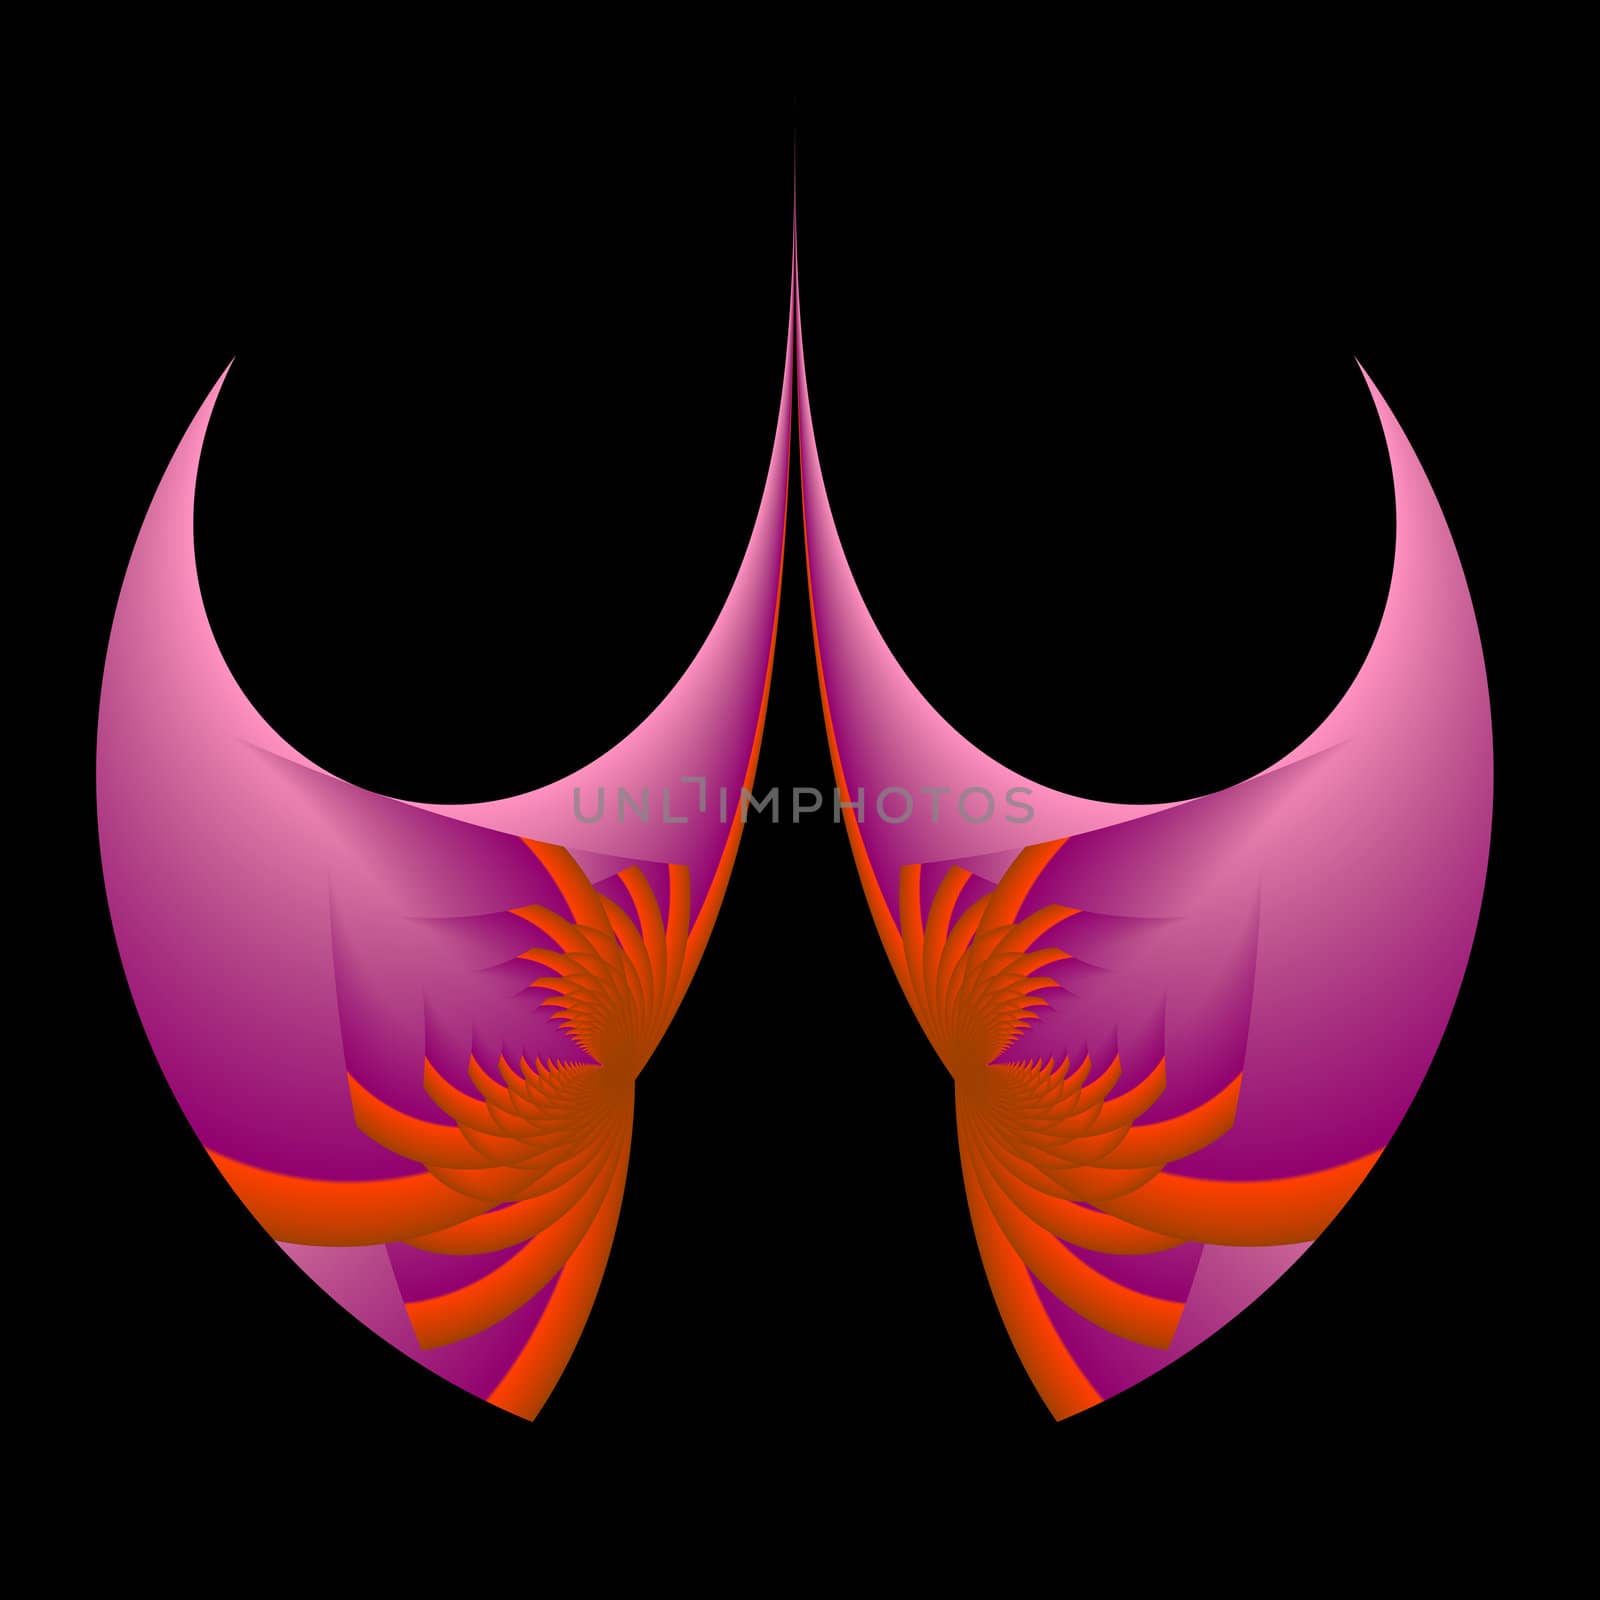 An abstract fractal image done in shades of pink and orange to look as if a curtain is parting.